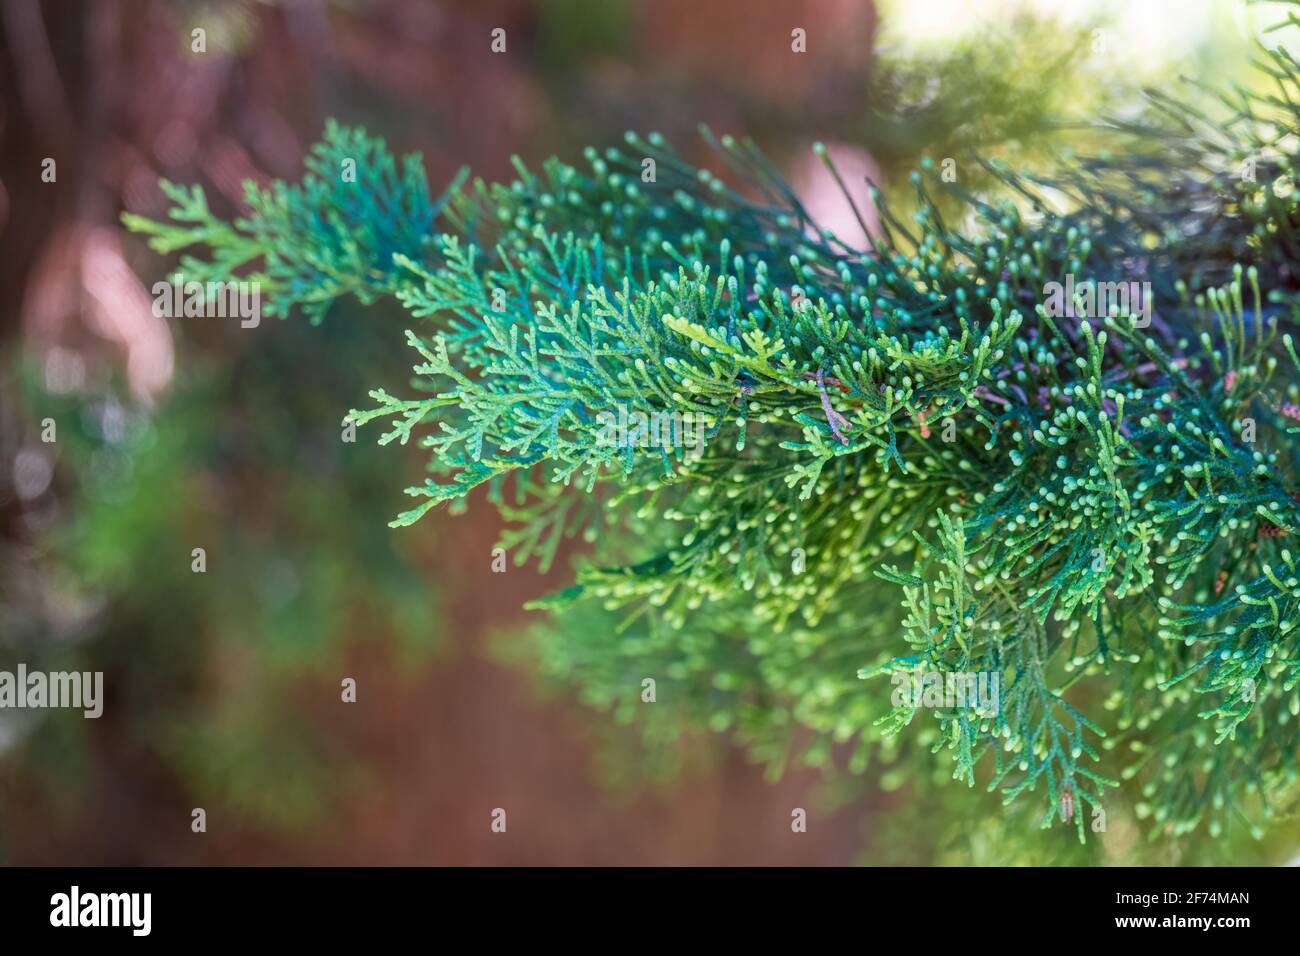 Juniper green branch close up on blurred background. Juniperus excelsa, commonly called the Greek juniper, Stock Photo